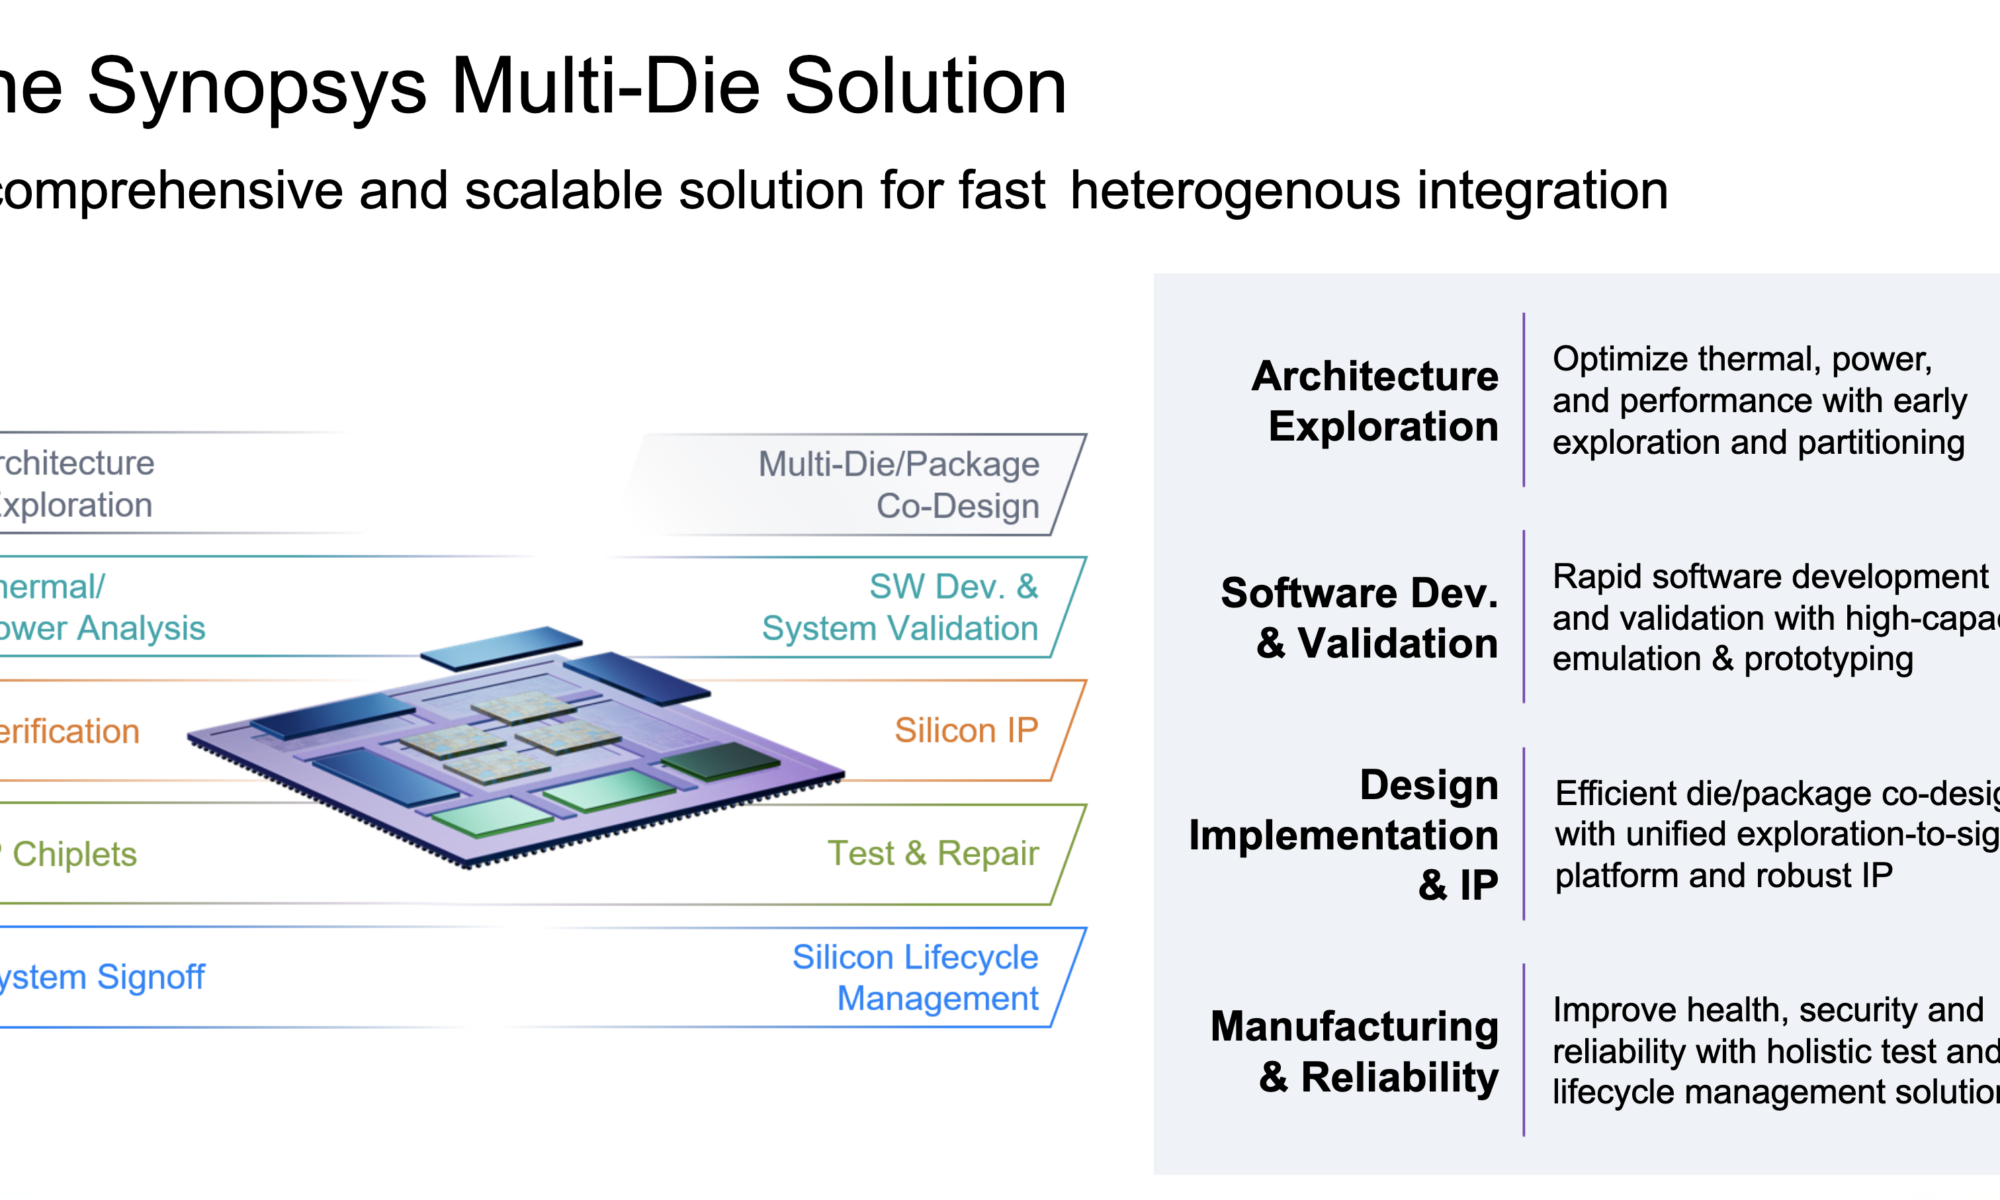 The Synopsys Multi Die Solution